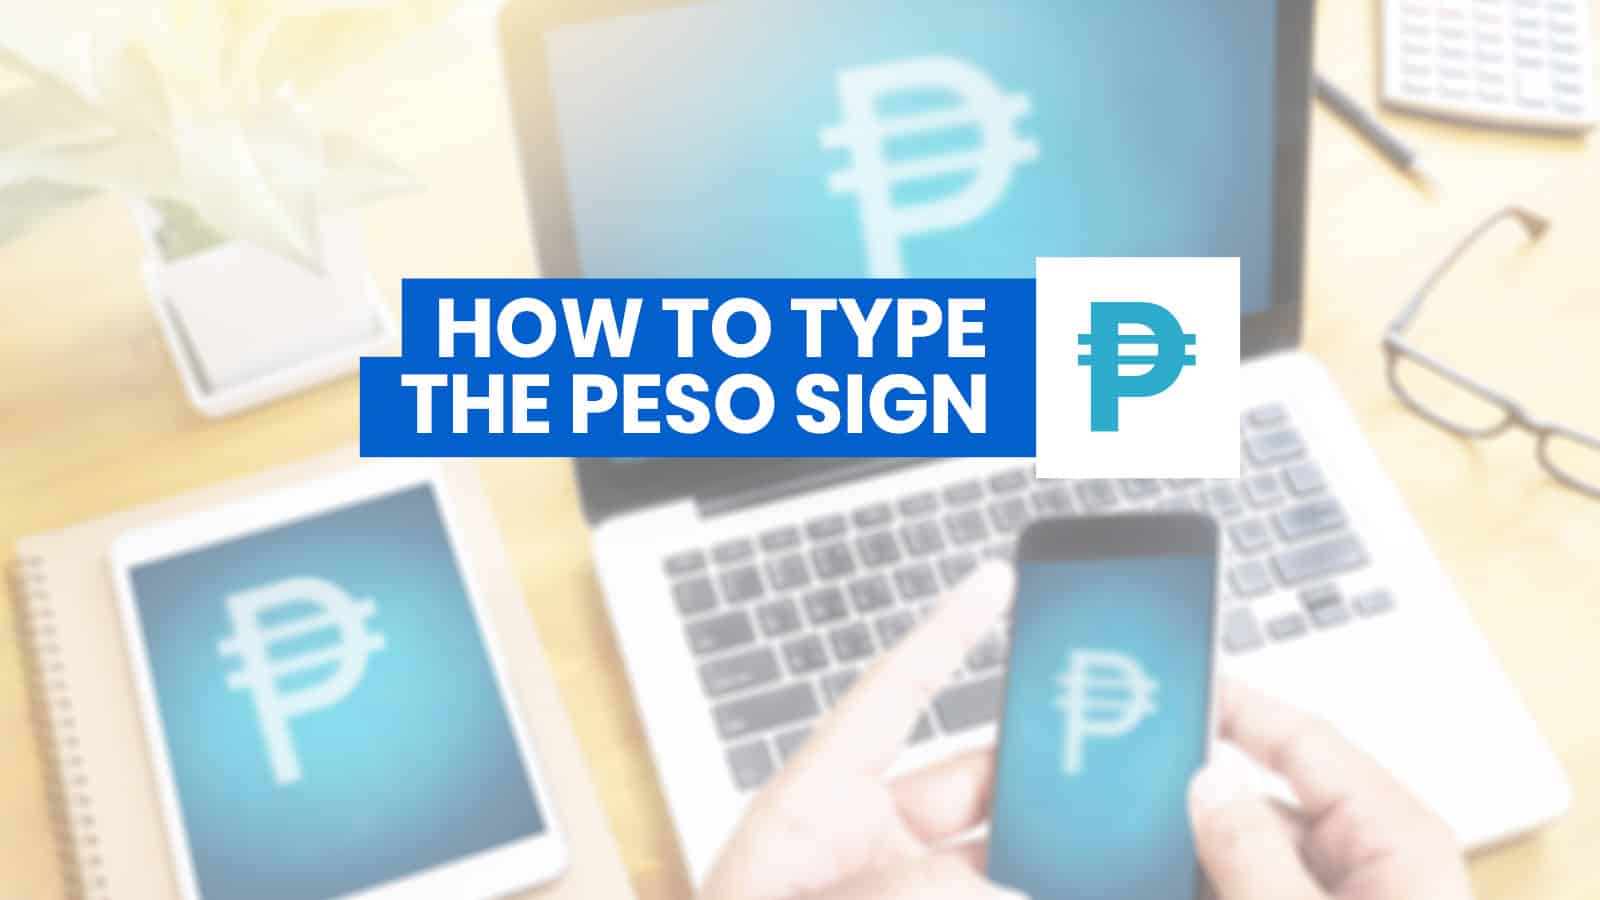 shortcut key for peso sign in microsoft word